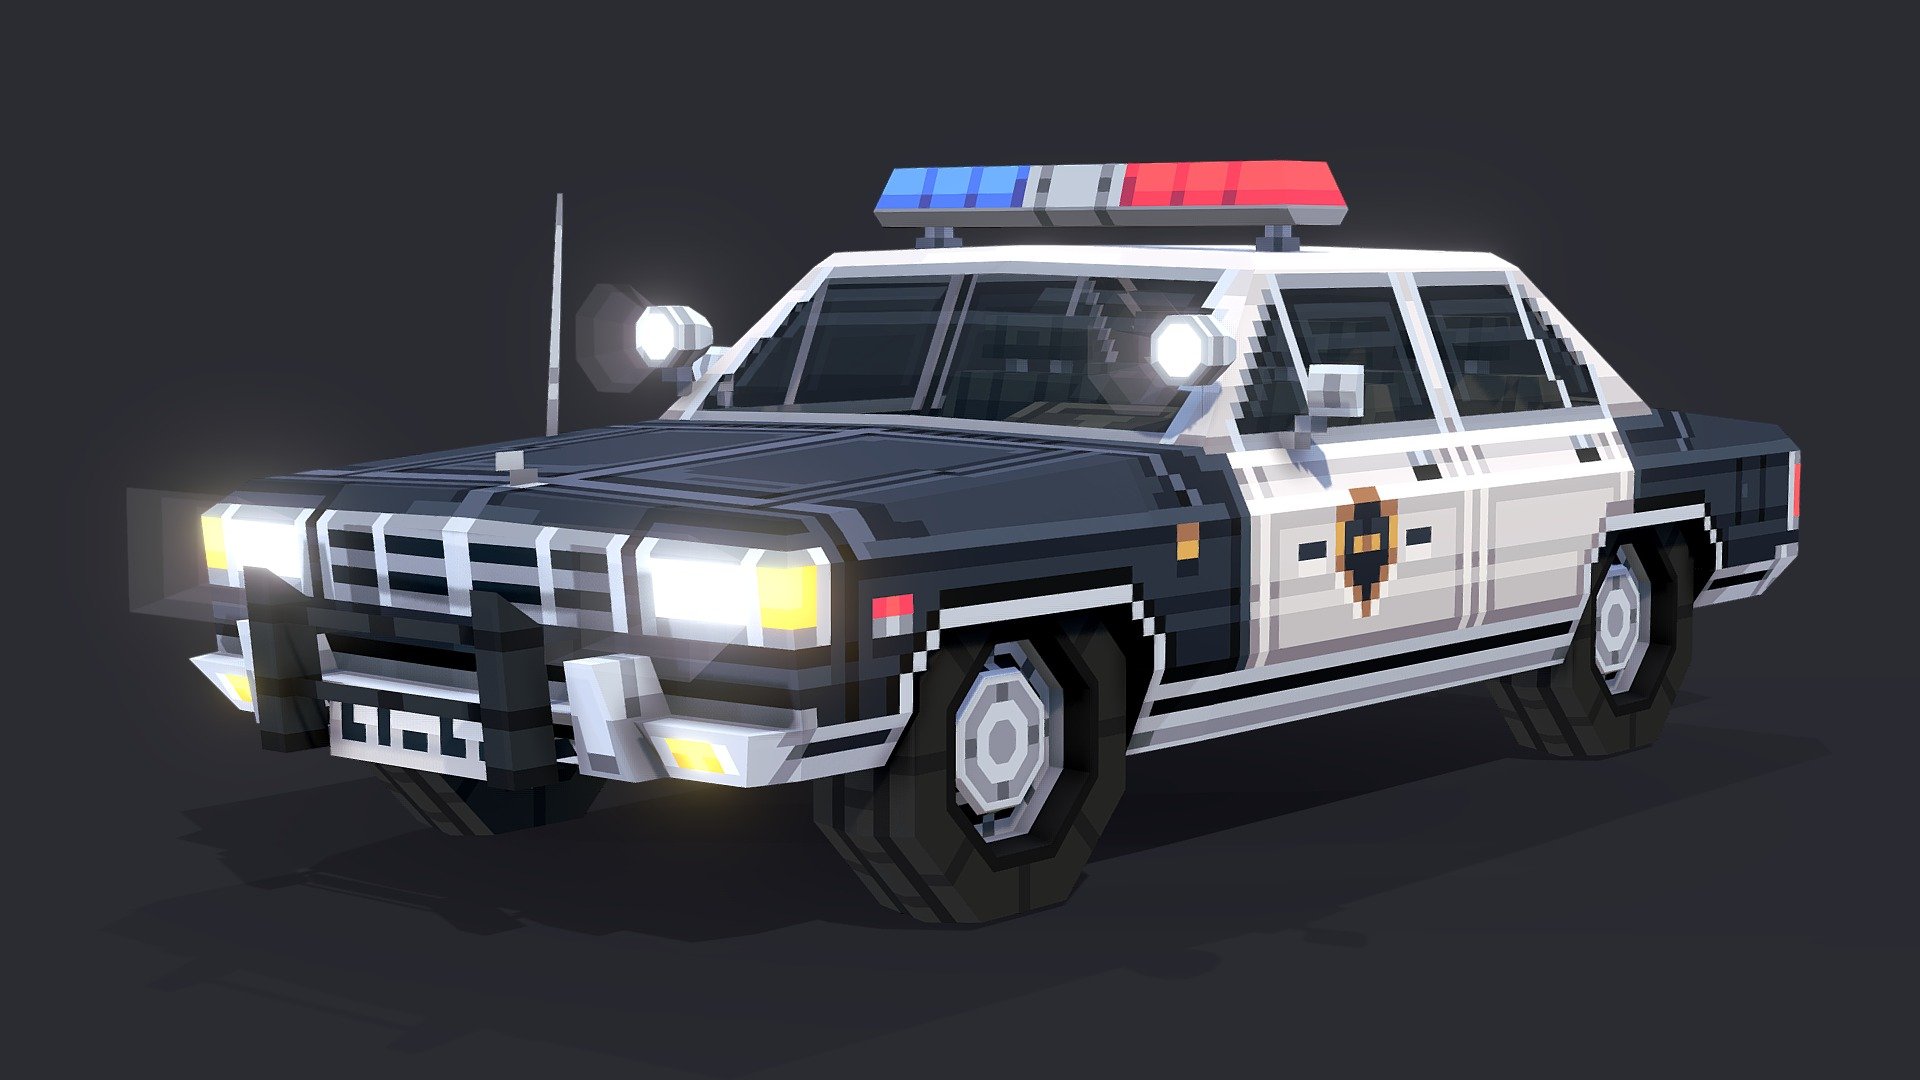 Police car.
Made with Blockbench


Additional files:



(5) Additional textures

.bbmodel file


Asset includes:



Customizable interior

Customizable exterior

Customizable wheels


Contact:



Mail: contact@grafisch.media

Discord: @grafisch


Configure this asset:
Configure this asset on my website to view all variations.
https://grafisch.media/assets/police-car
 - Police car - Buy Royalty Free 3D model by Jelle (@Grafisch) 3d model